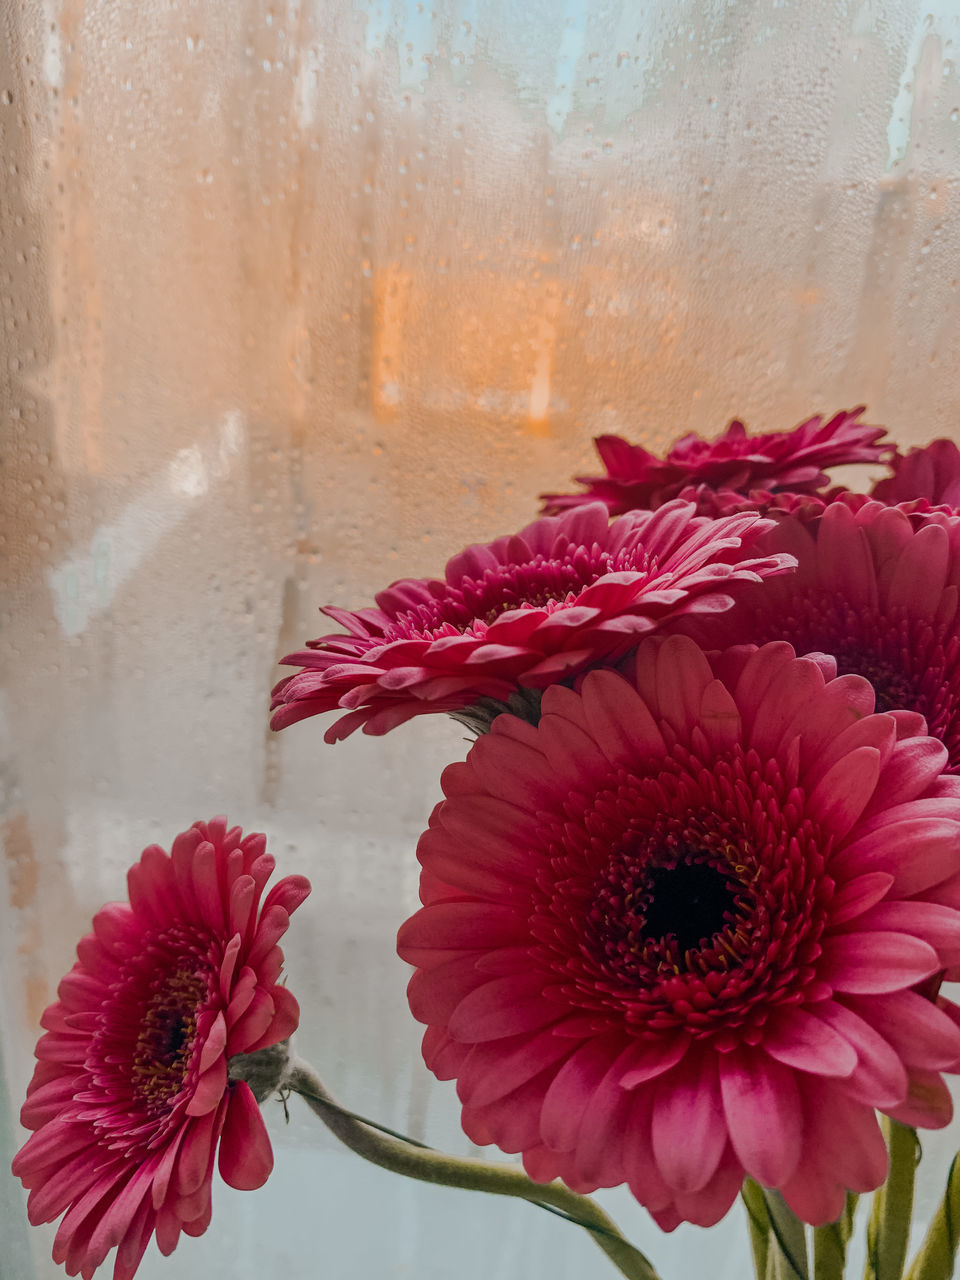 flower, flowering plant, plant, pink, freshness, red, nature, beauty in nature, fragility, close-up, flower head, petal, inflorescence, floristry, no people, water, indoors, bouquet, growth, gerbera daisy, window, art